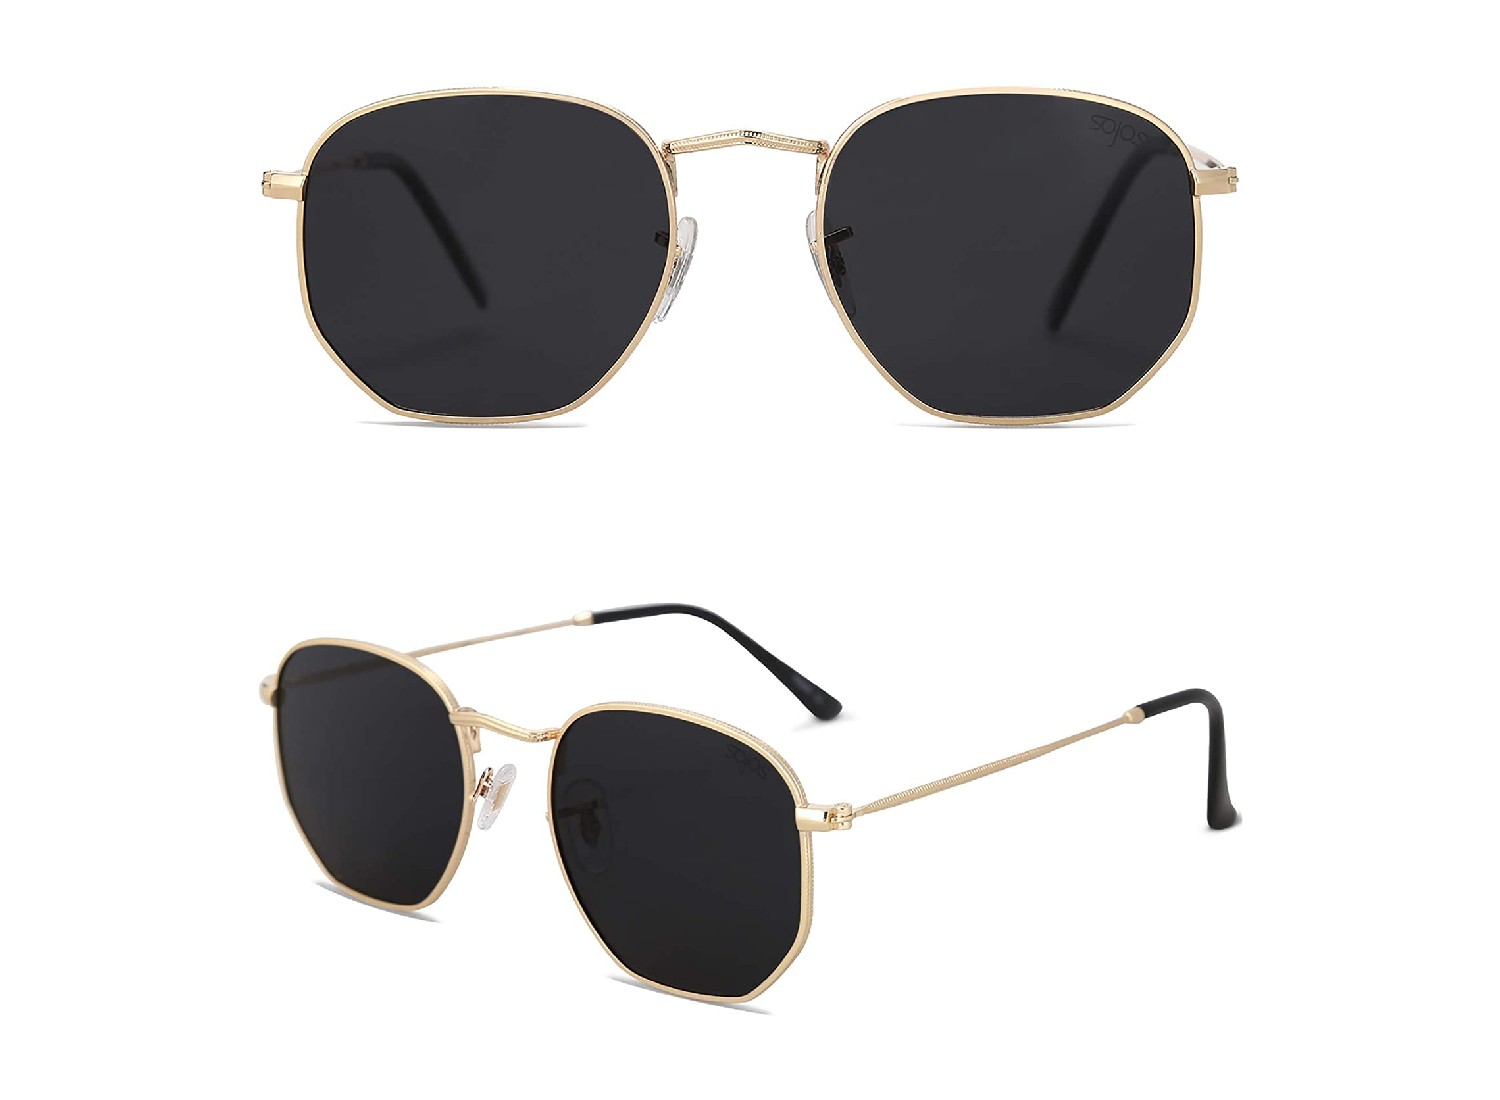 A pair of black sunglasses with gold frames shown from two different angles.